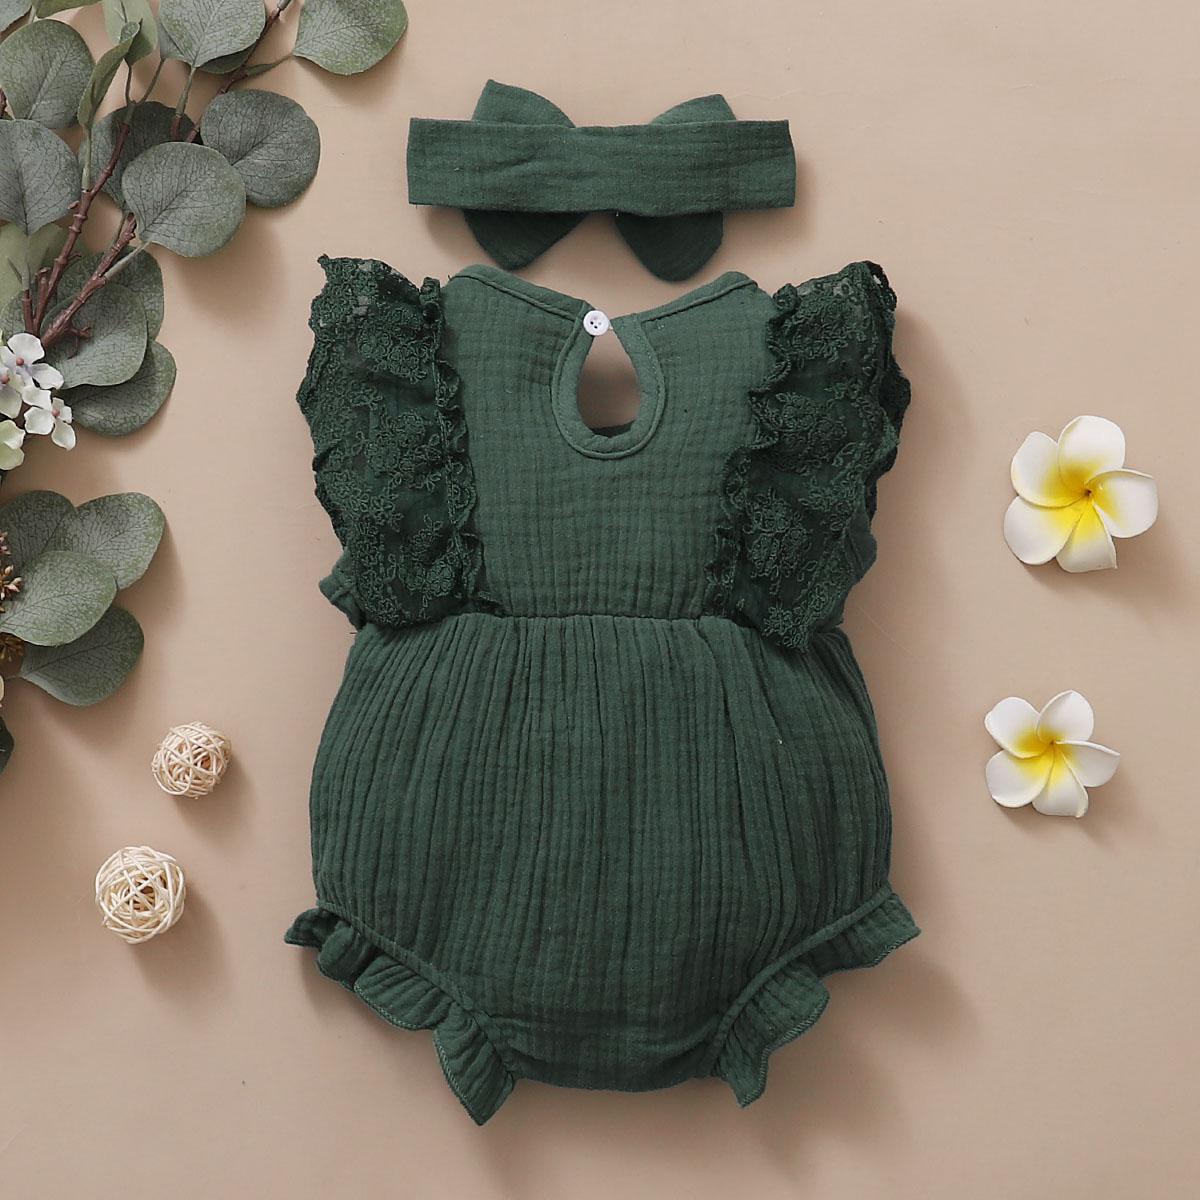 0-18M Ready Stock 0-18 Months Baby Girls Clothes Sleeveless Bow Bodysuit Solid Color Jumpsuit  Headband 2Pcs Set Green catpapa 12011153-3